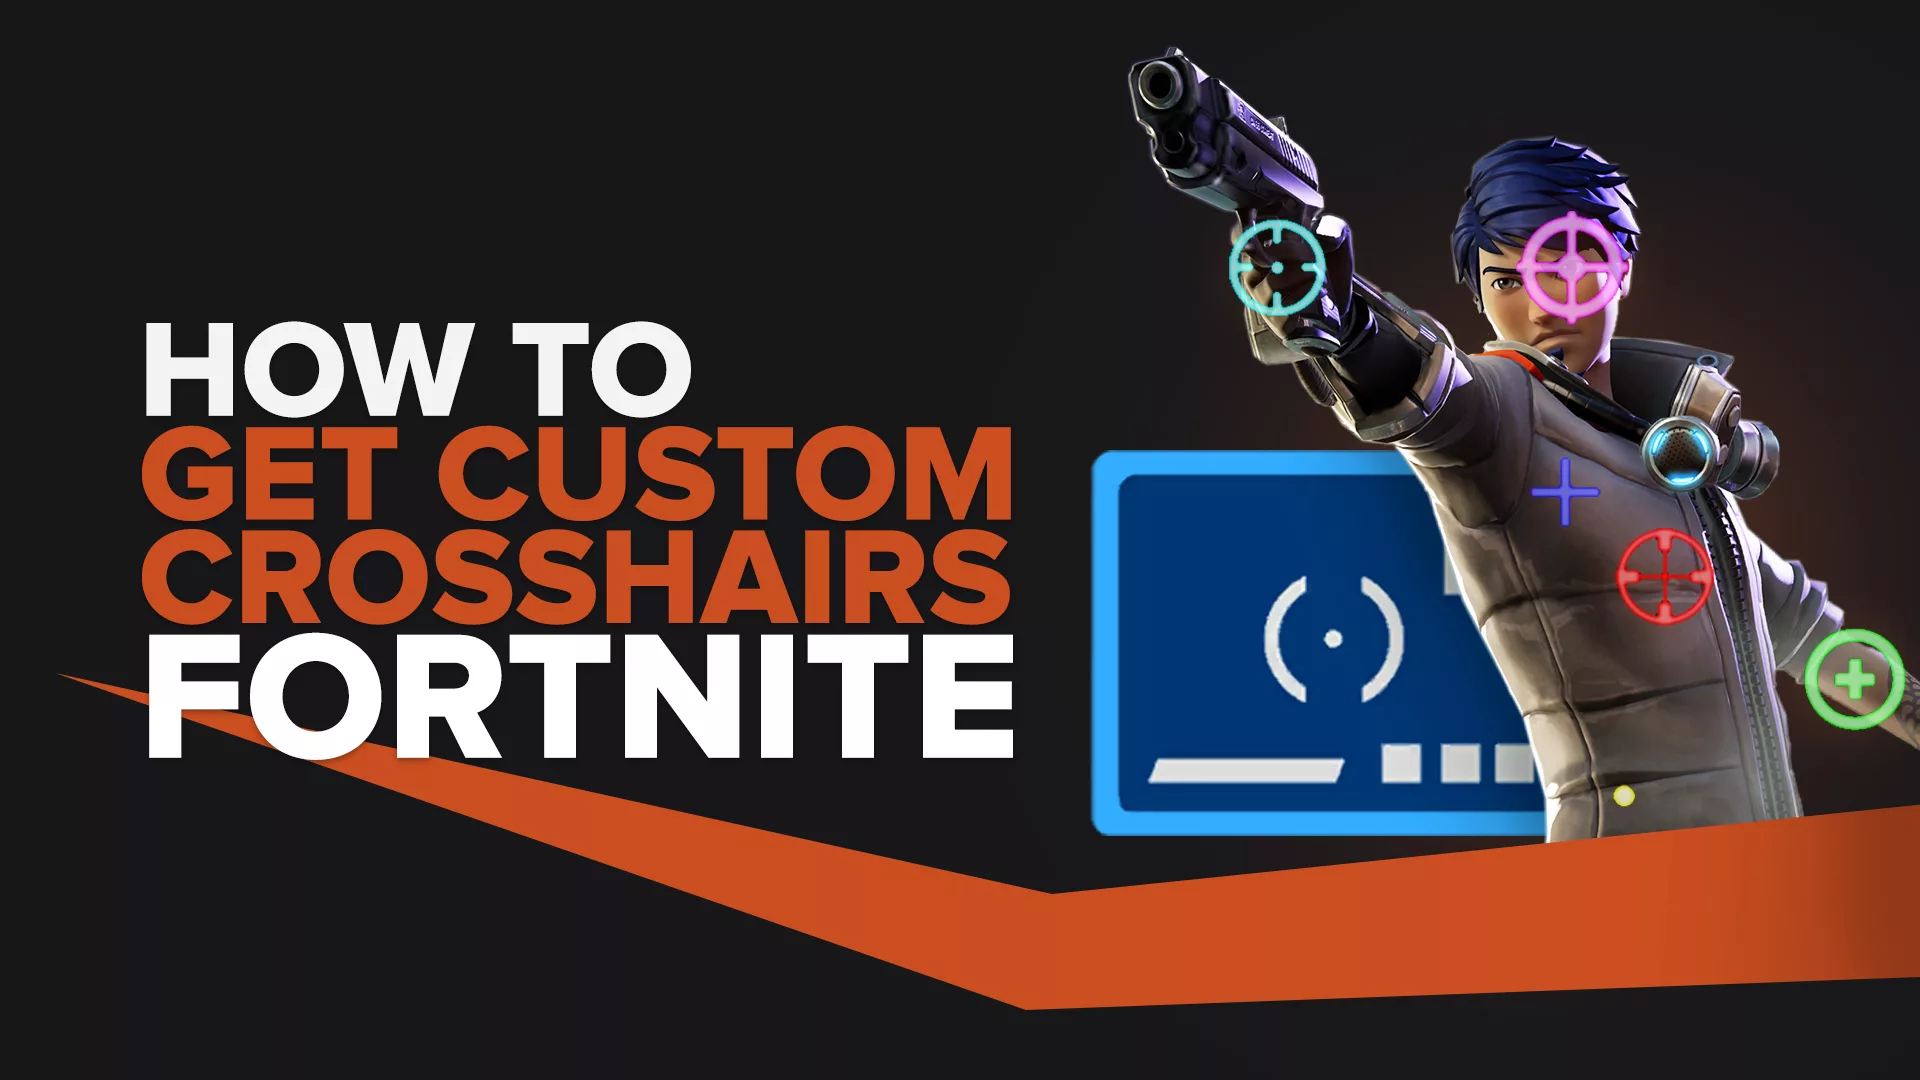 Customizing Your Crosshair in Fortnite: A Step-by-Step Guide